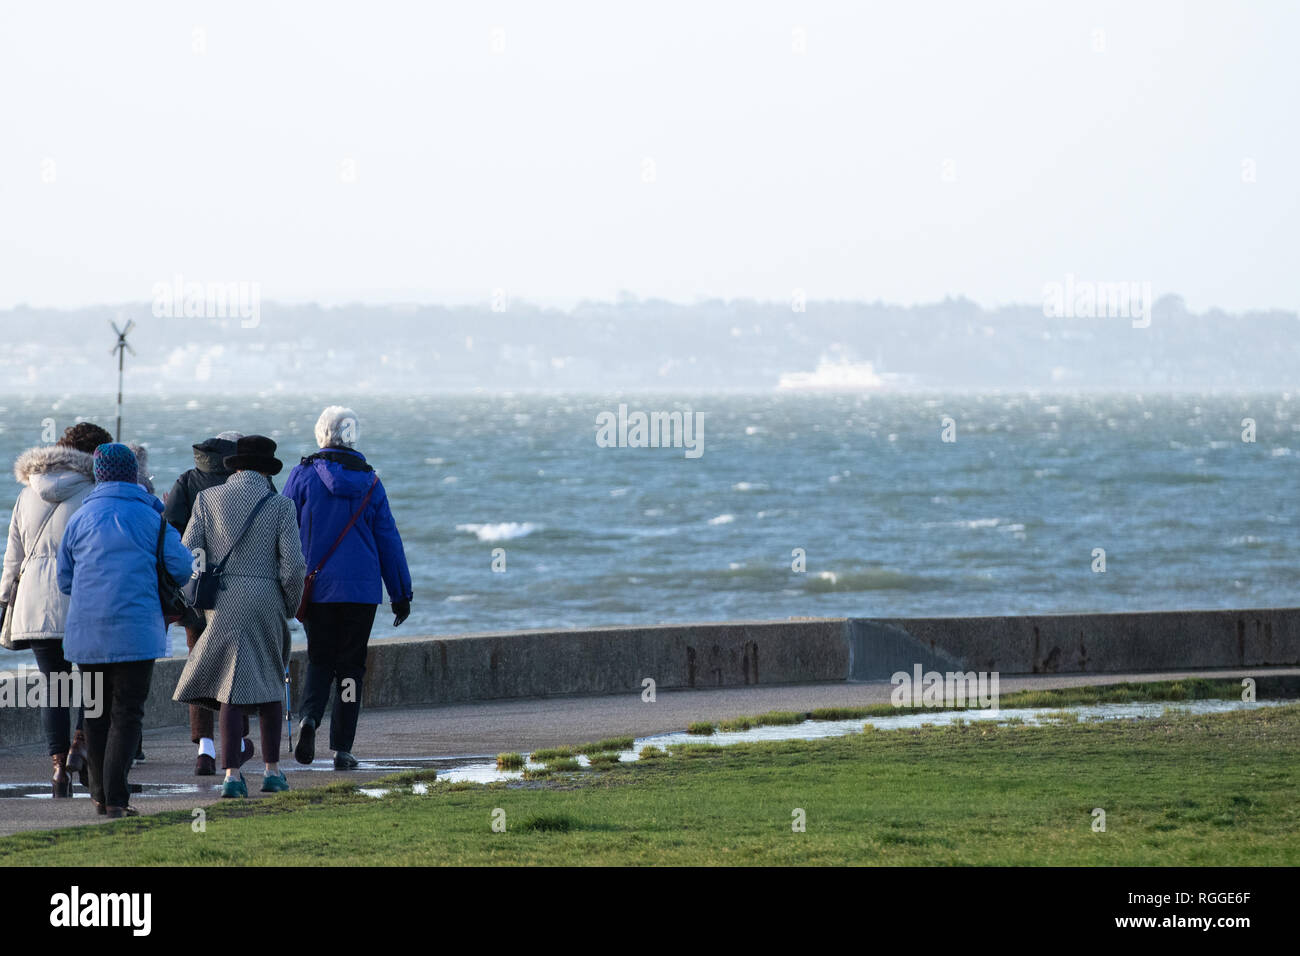 A group of elderly people taking a seaside walk on a very windy day Stock Photo